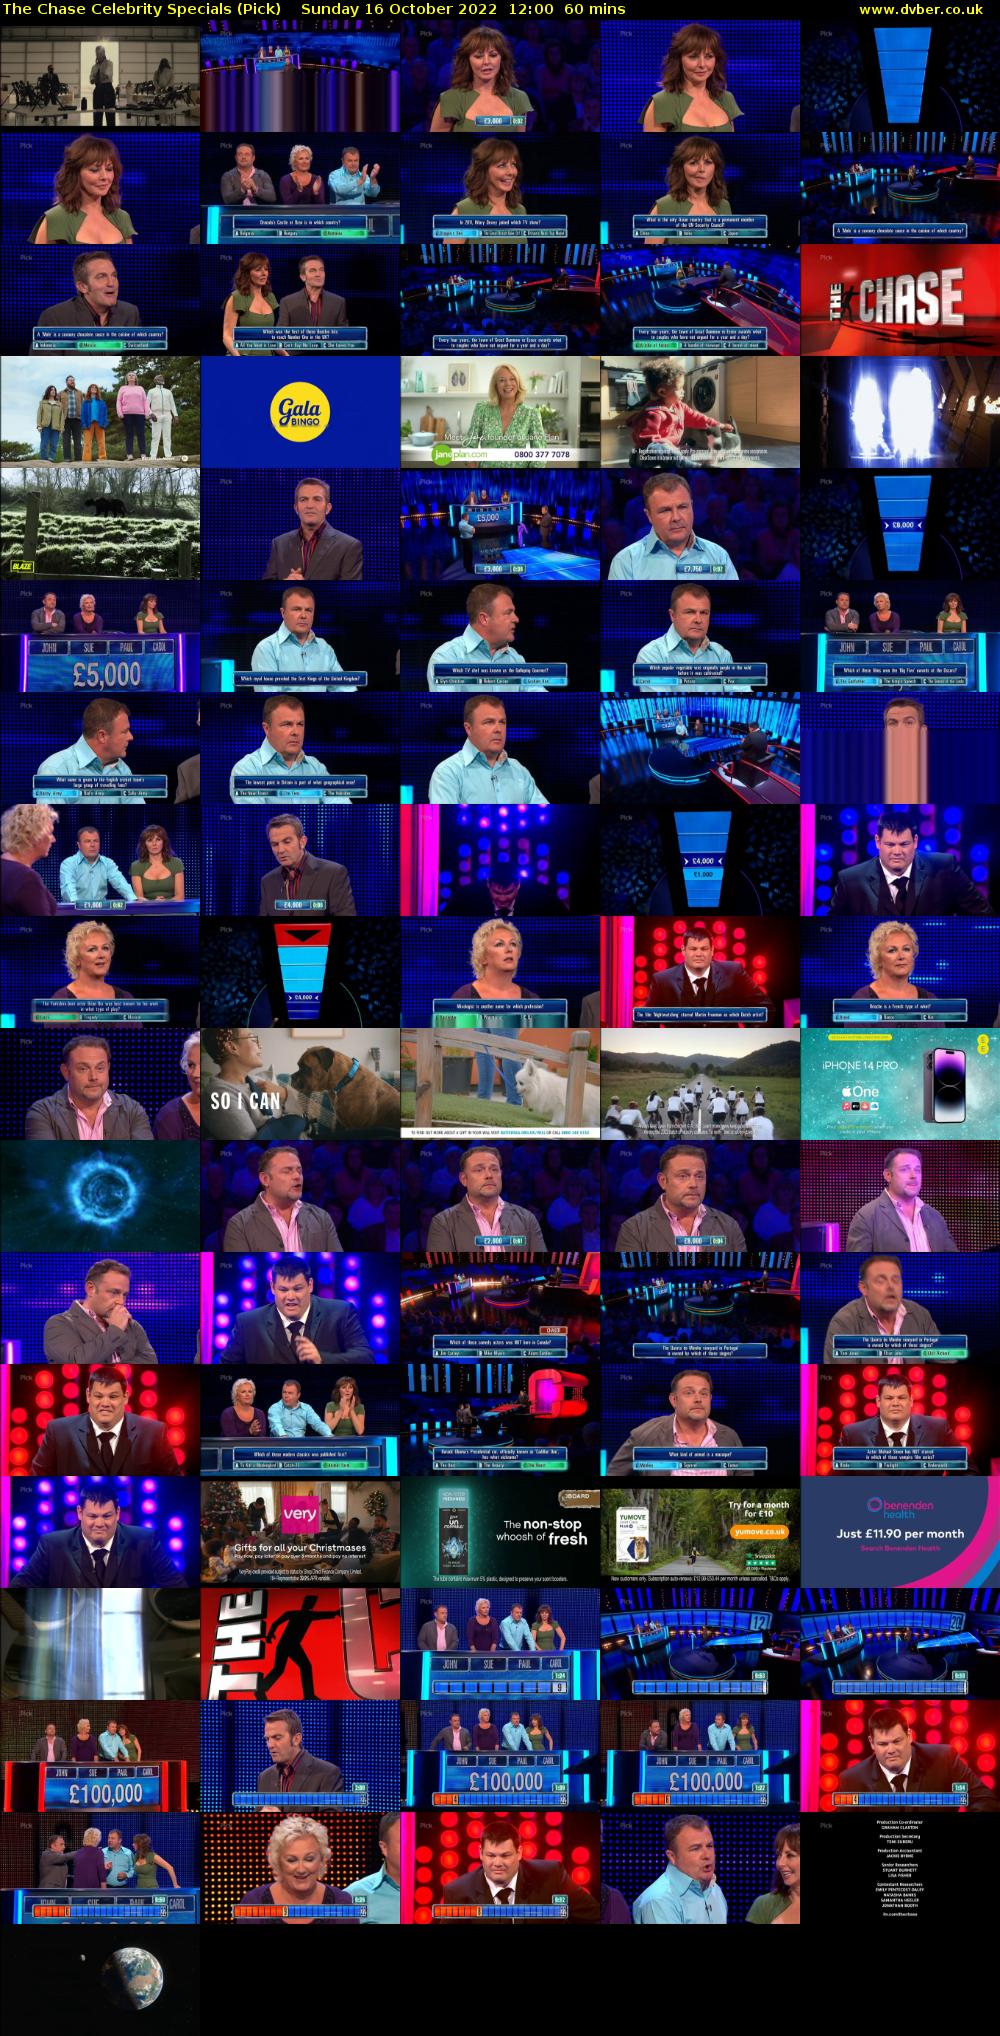 The Chase Celebrity Specials (Pick) Sunday 16 October 2022 12:00 - 13:00